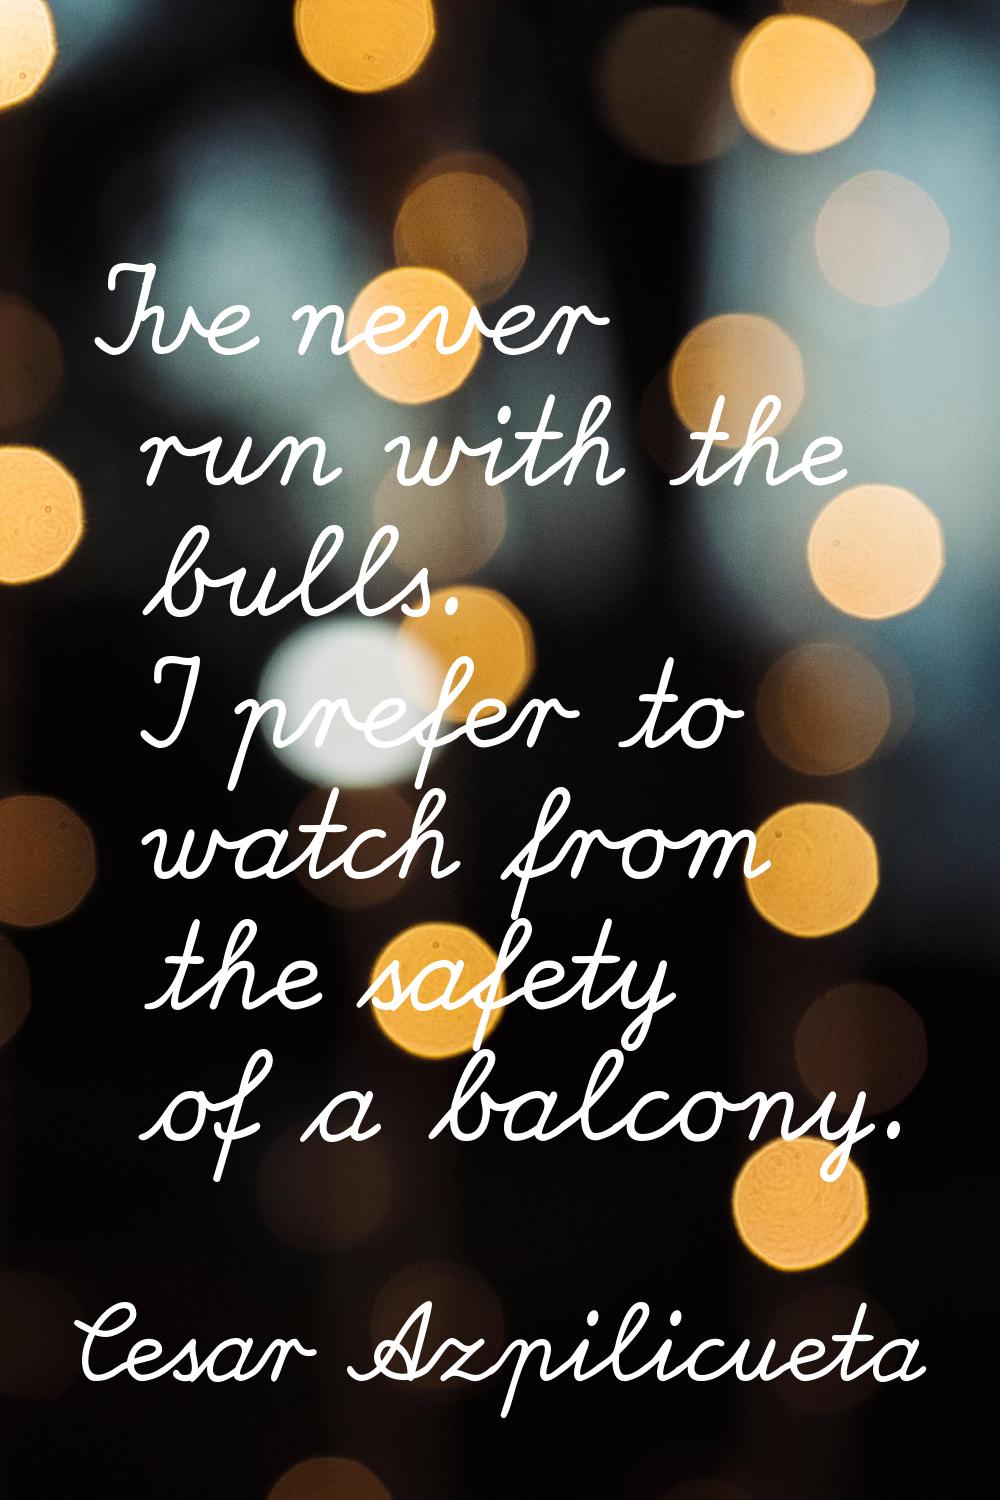 I've never run with the bulls. I prefer to watch from the safety of a balcony.